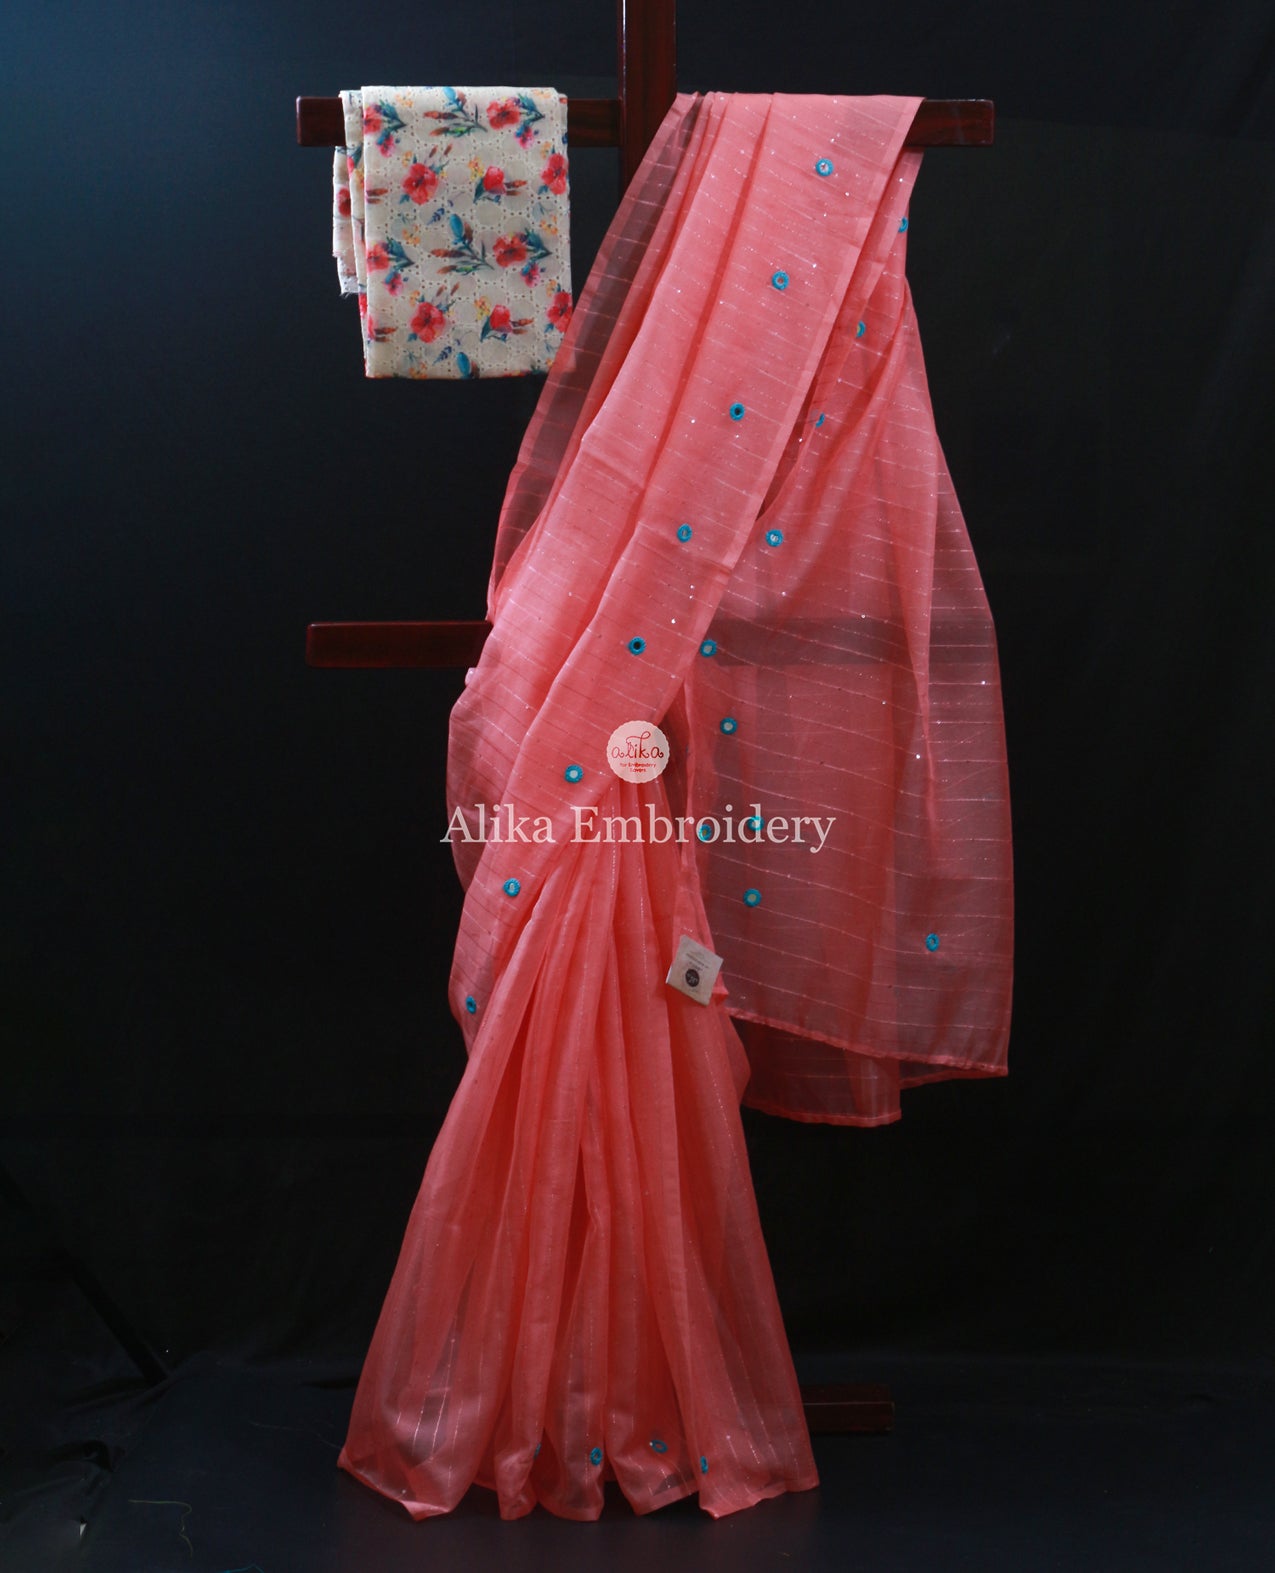 Captivating Peach Organza Saree with Intricate Glass Work Embellishments